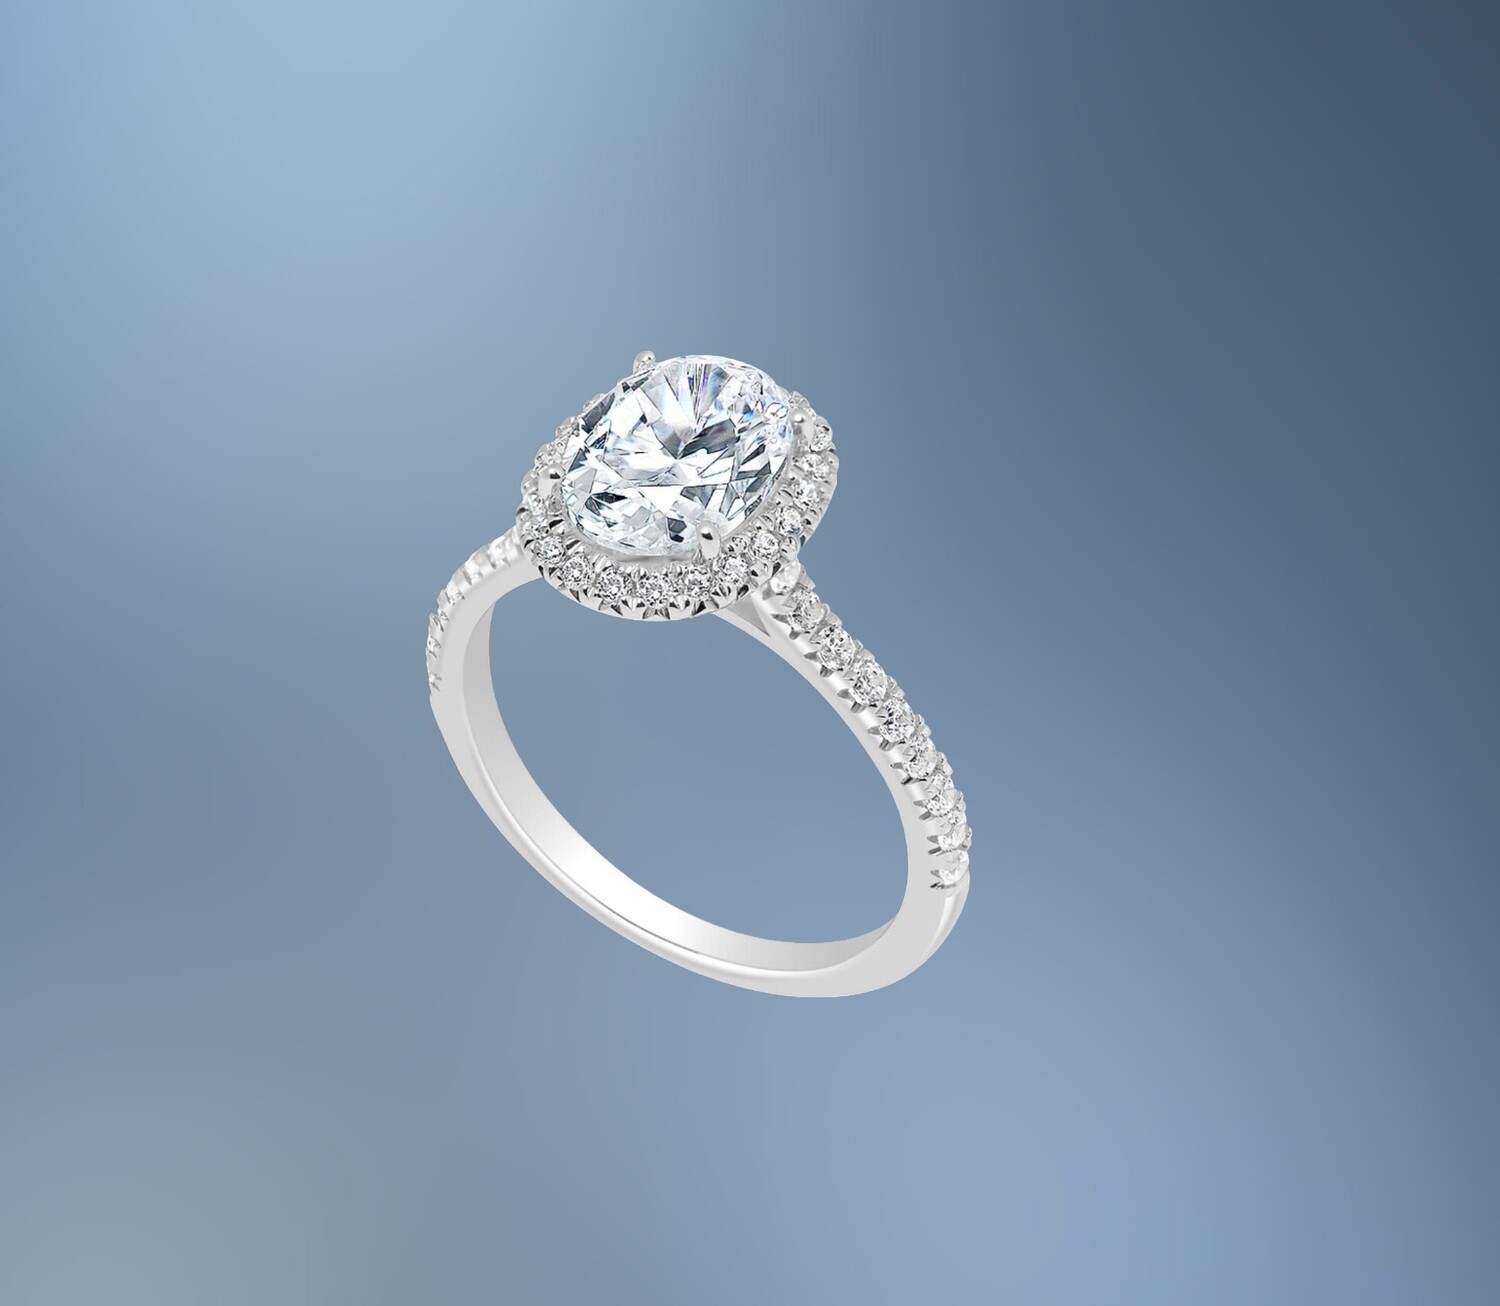 14KT WHITE GOLD OVAL HALO ENGAGEMENT RING FEATURING 40 ROUND BRILLIANT DIAMONDS TOTALING .43 CTS